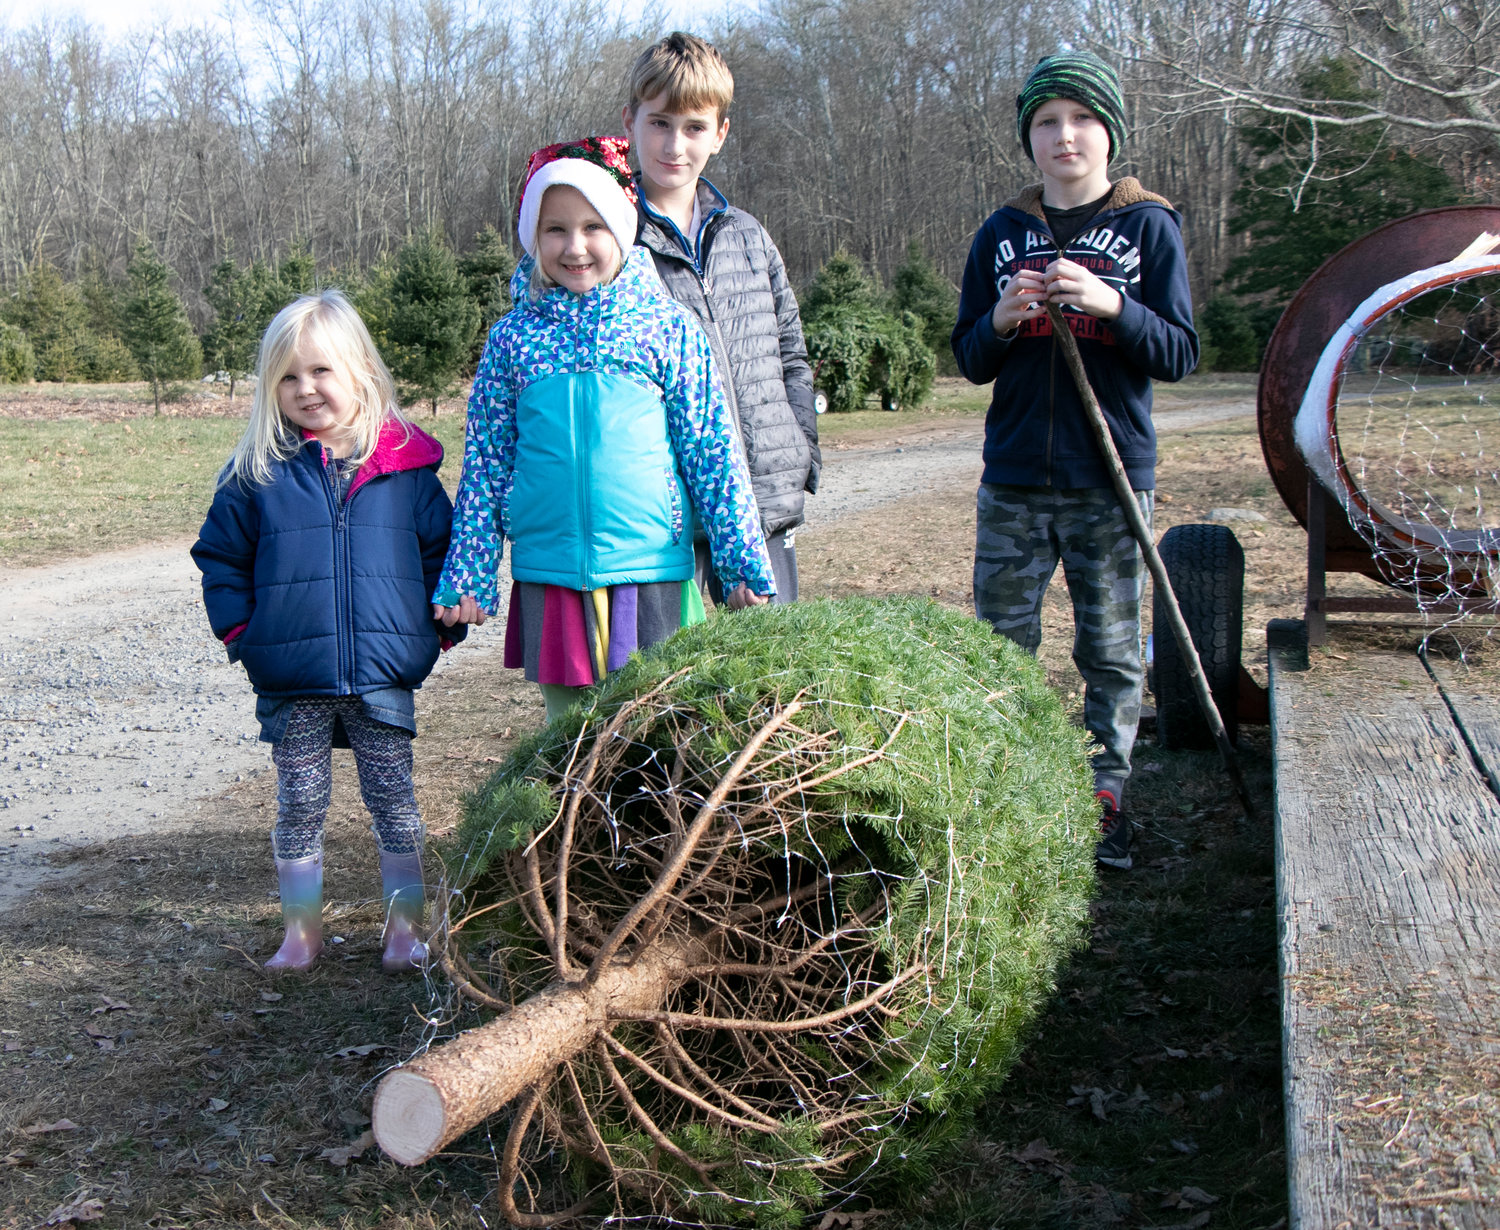 Ruthy Canney, 3, Josephine, 6, CJ, 8 and Theo, 10, pose with their tree, cut for them Sunday at Hidden Spruce.